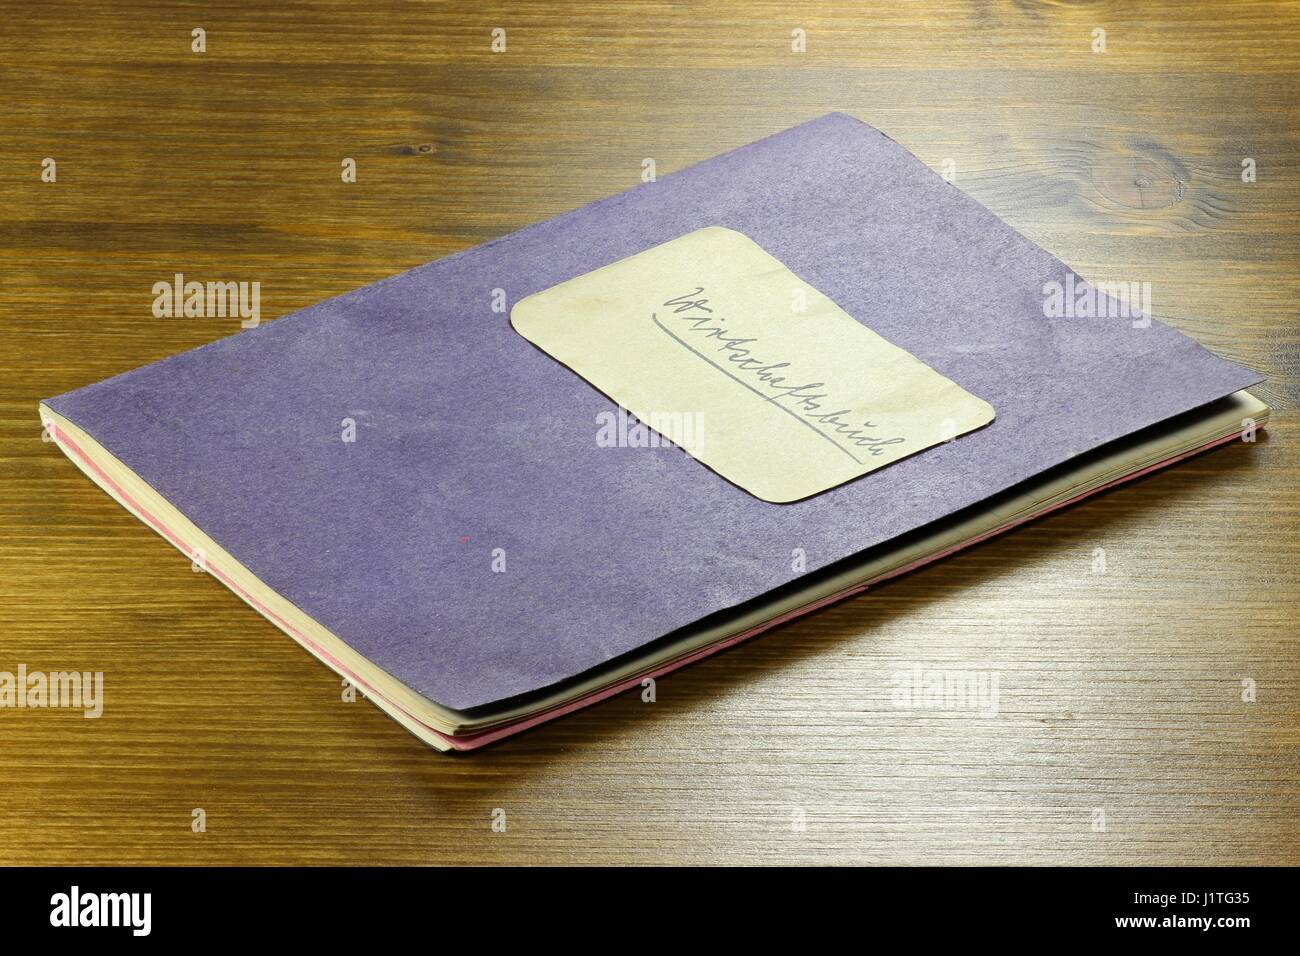 old German housekeeping book on wooden background Stock Photo